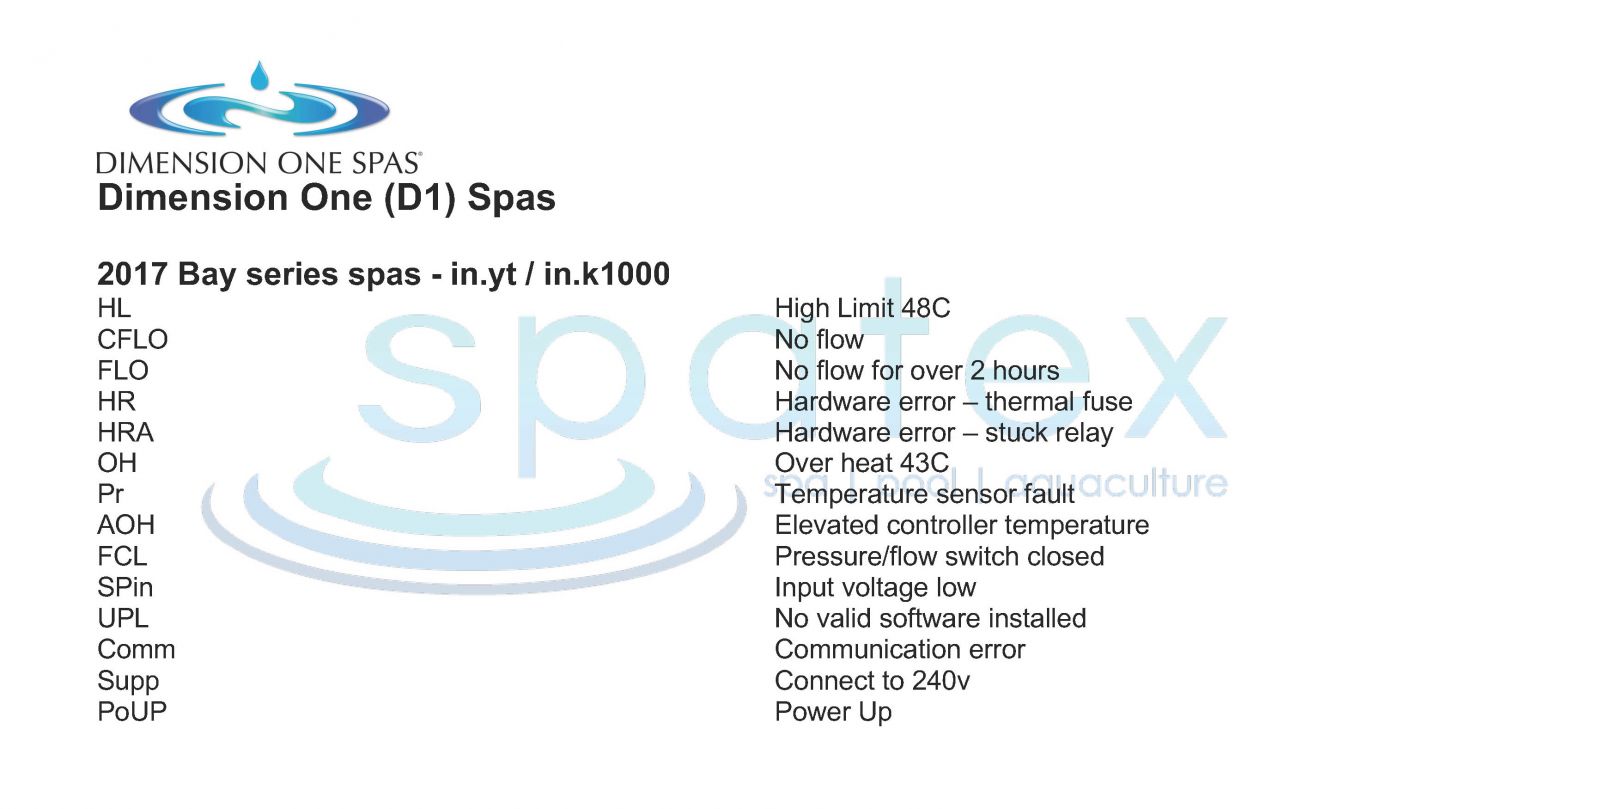 Dimension One Spas D1 topside spa error fault codes and messages